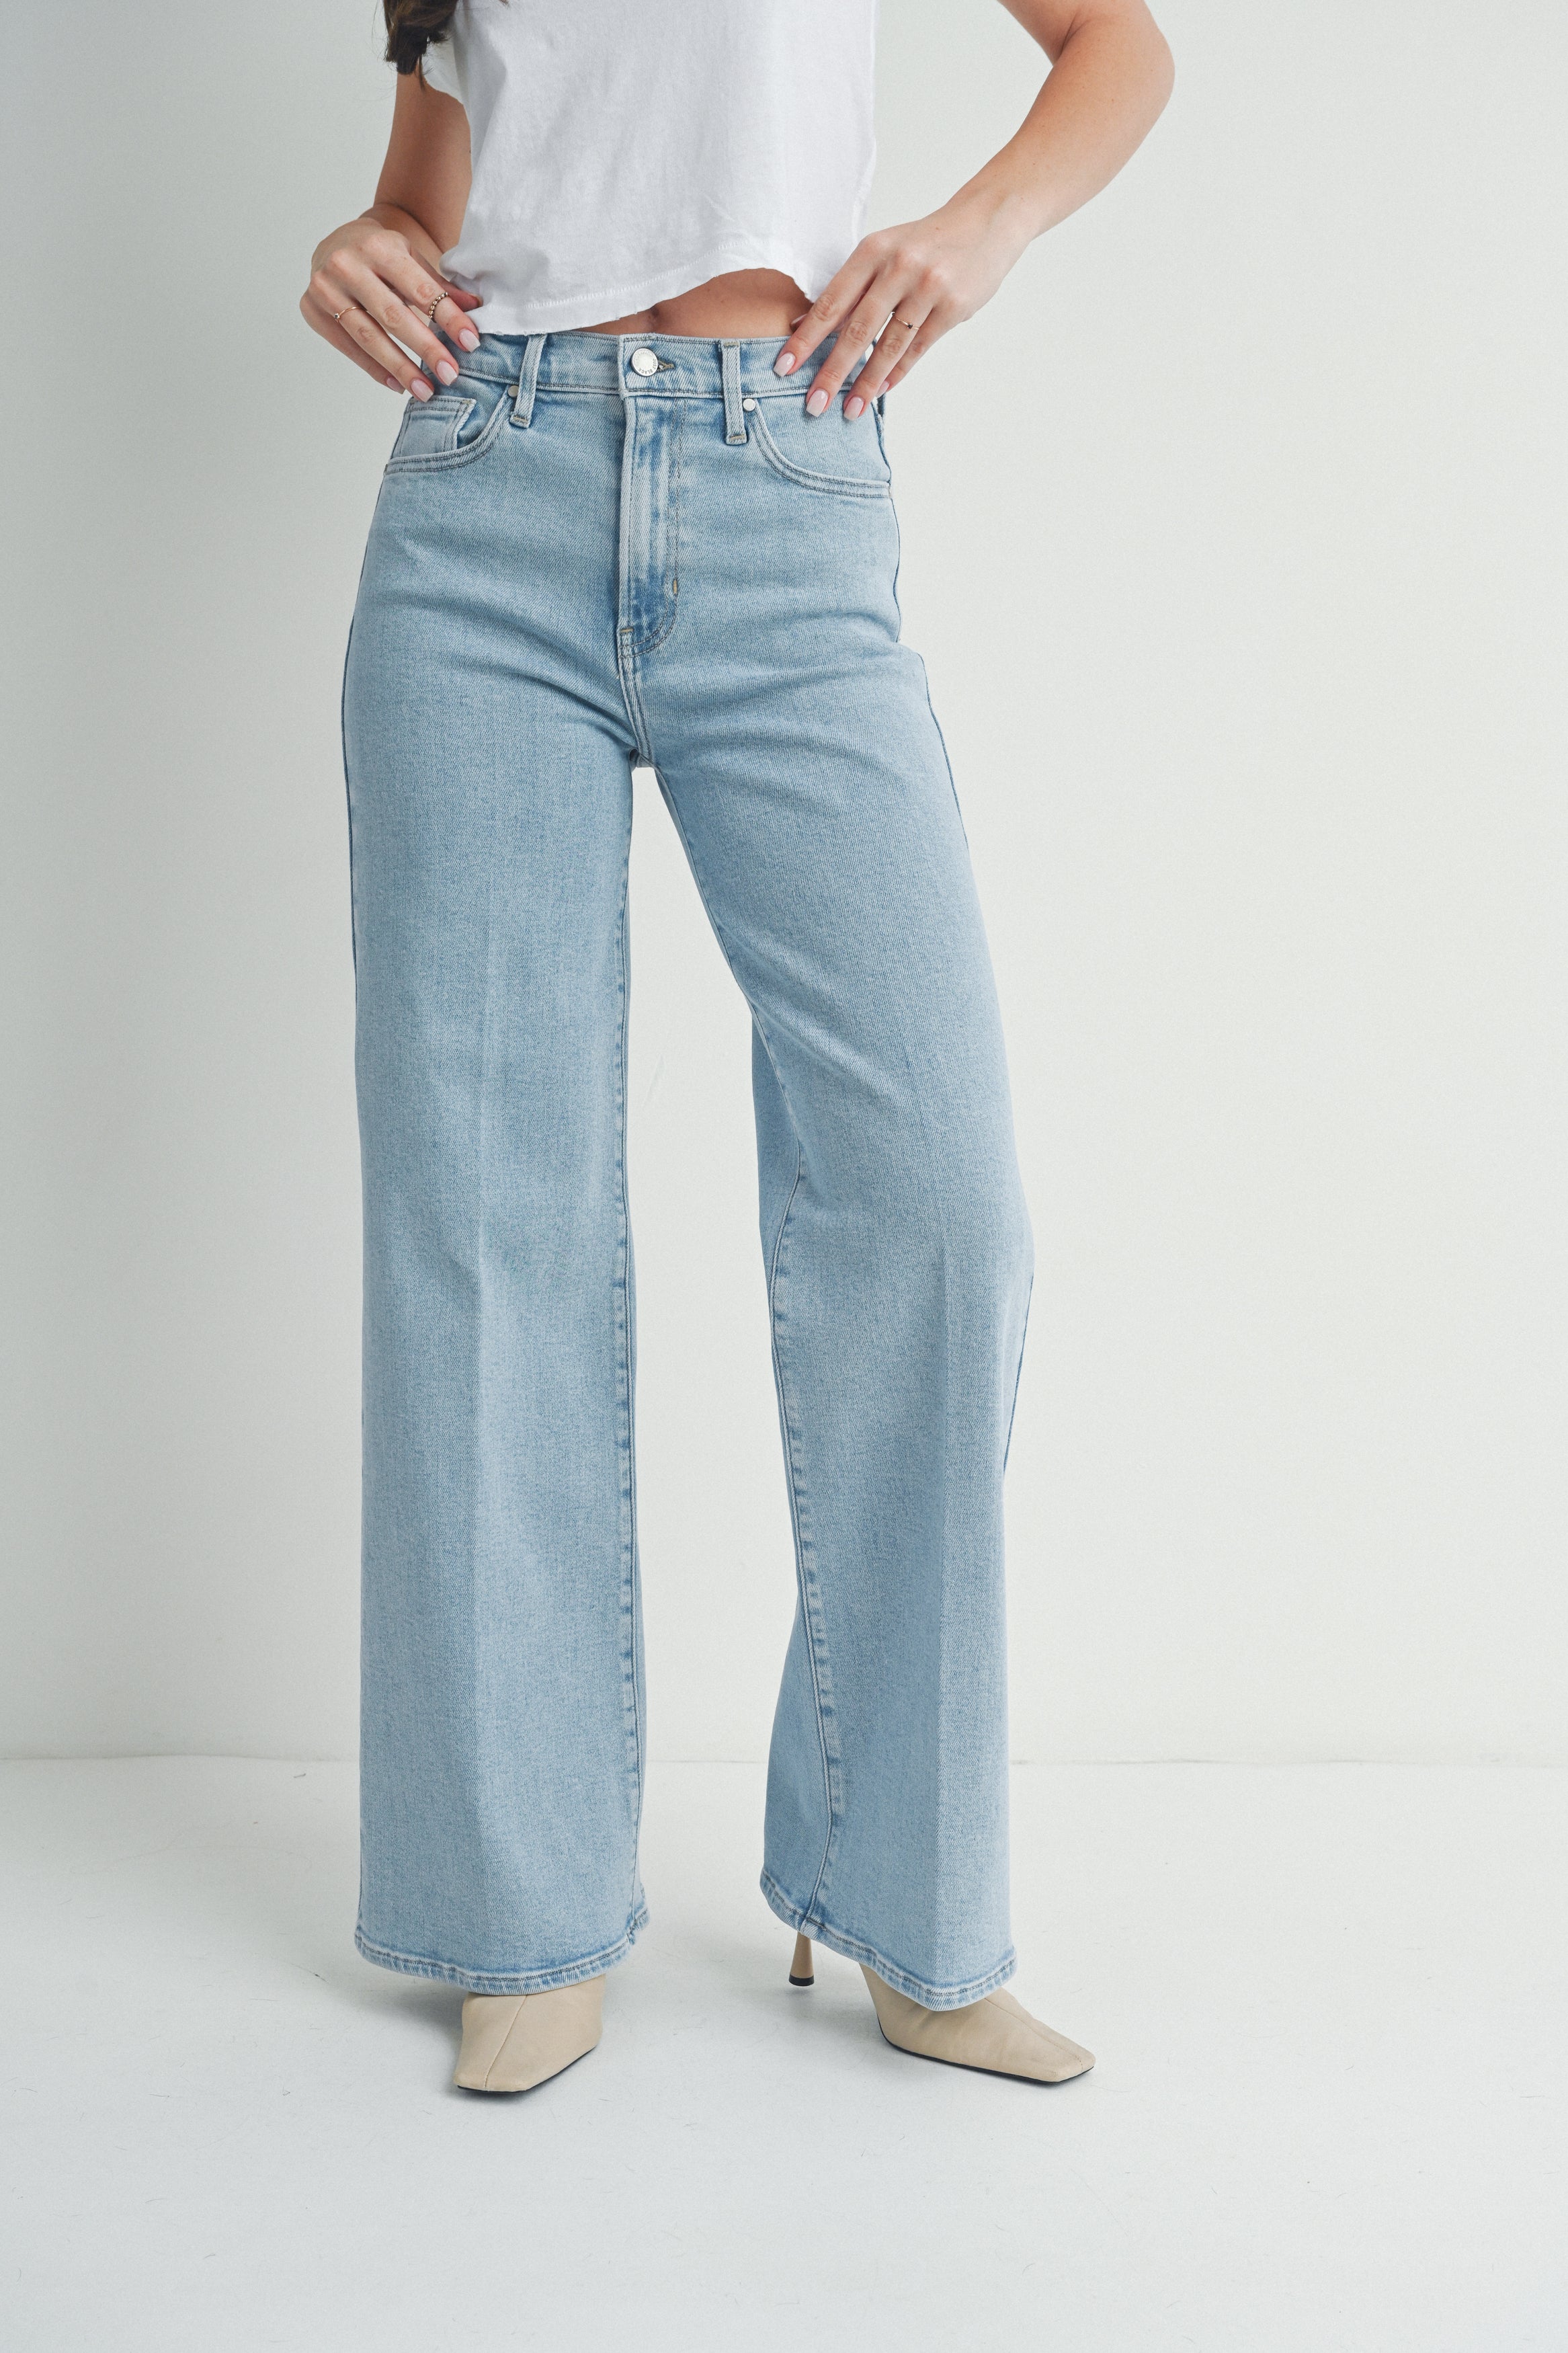 Sofia Jeans Bottoms Are the Denim Equivalent of Palazzo Pants | Us Weekly